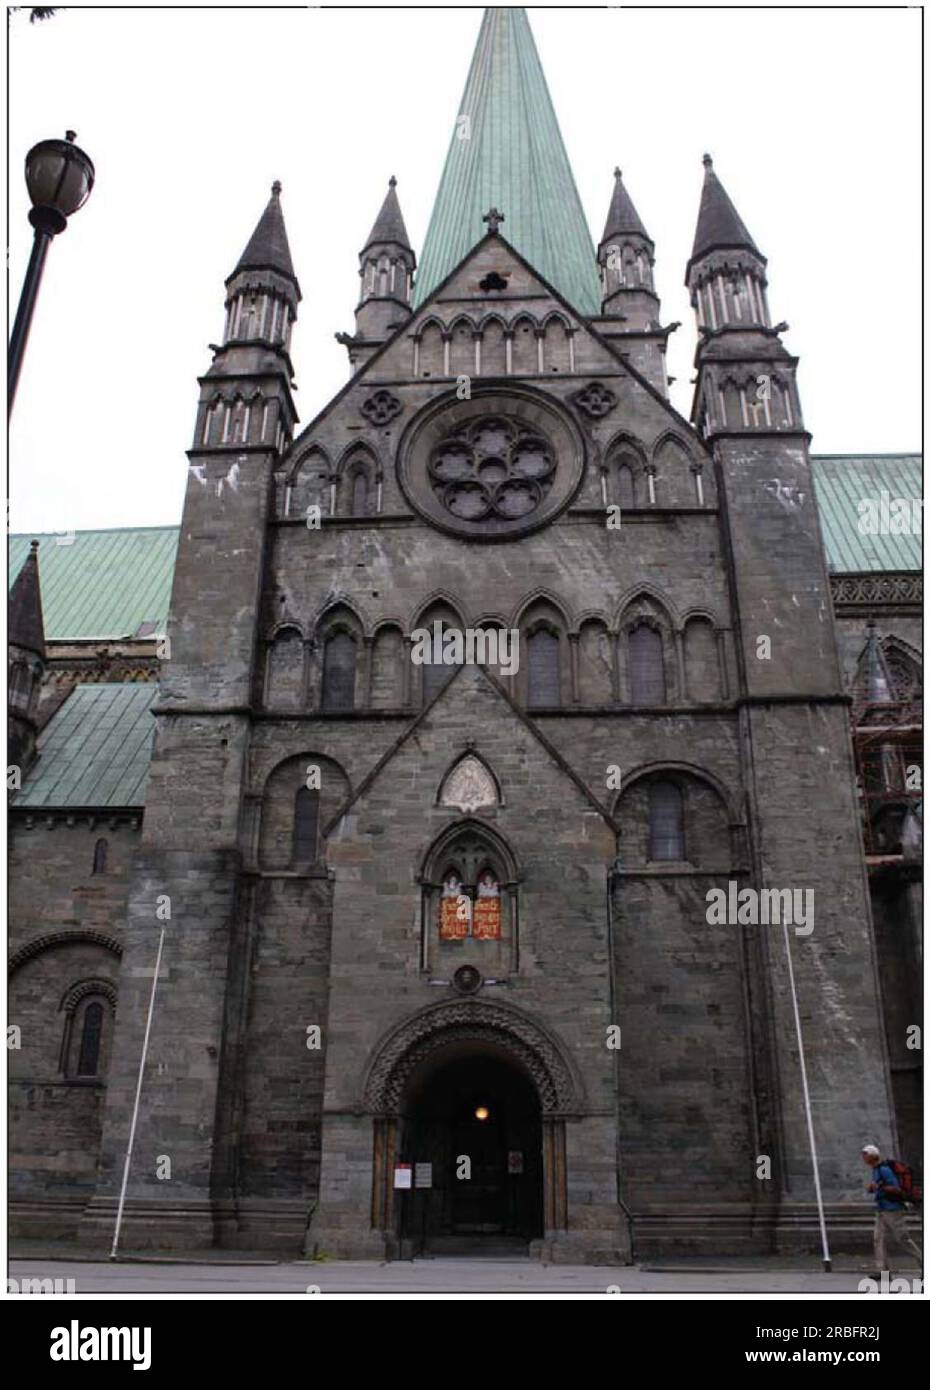 Romanesque Transept of Nidaros Cathedral, Norway 1070 by Romanesque Architecture Stock Photo